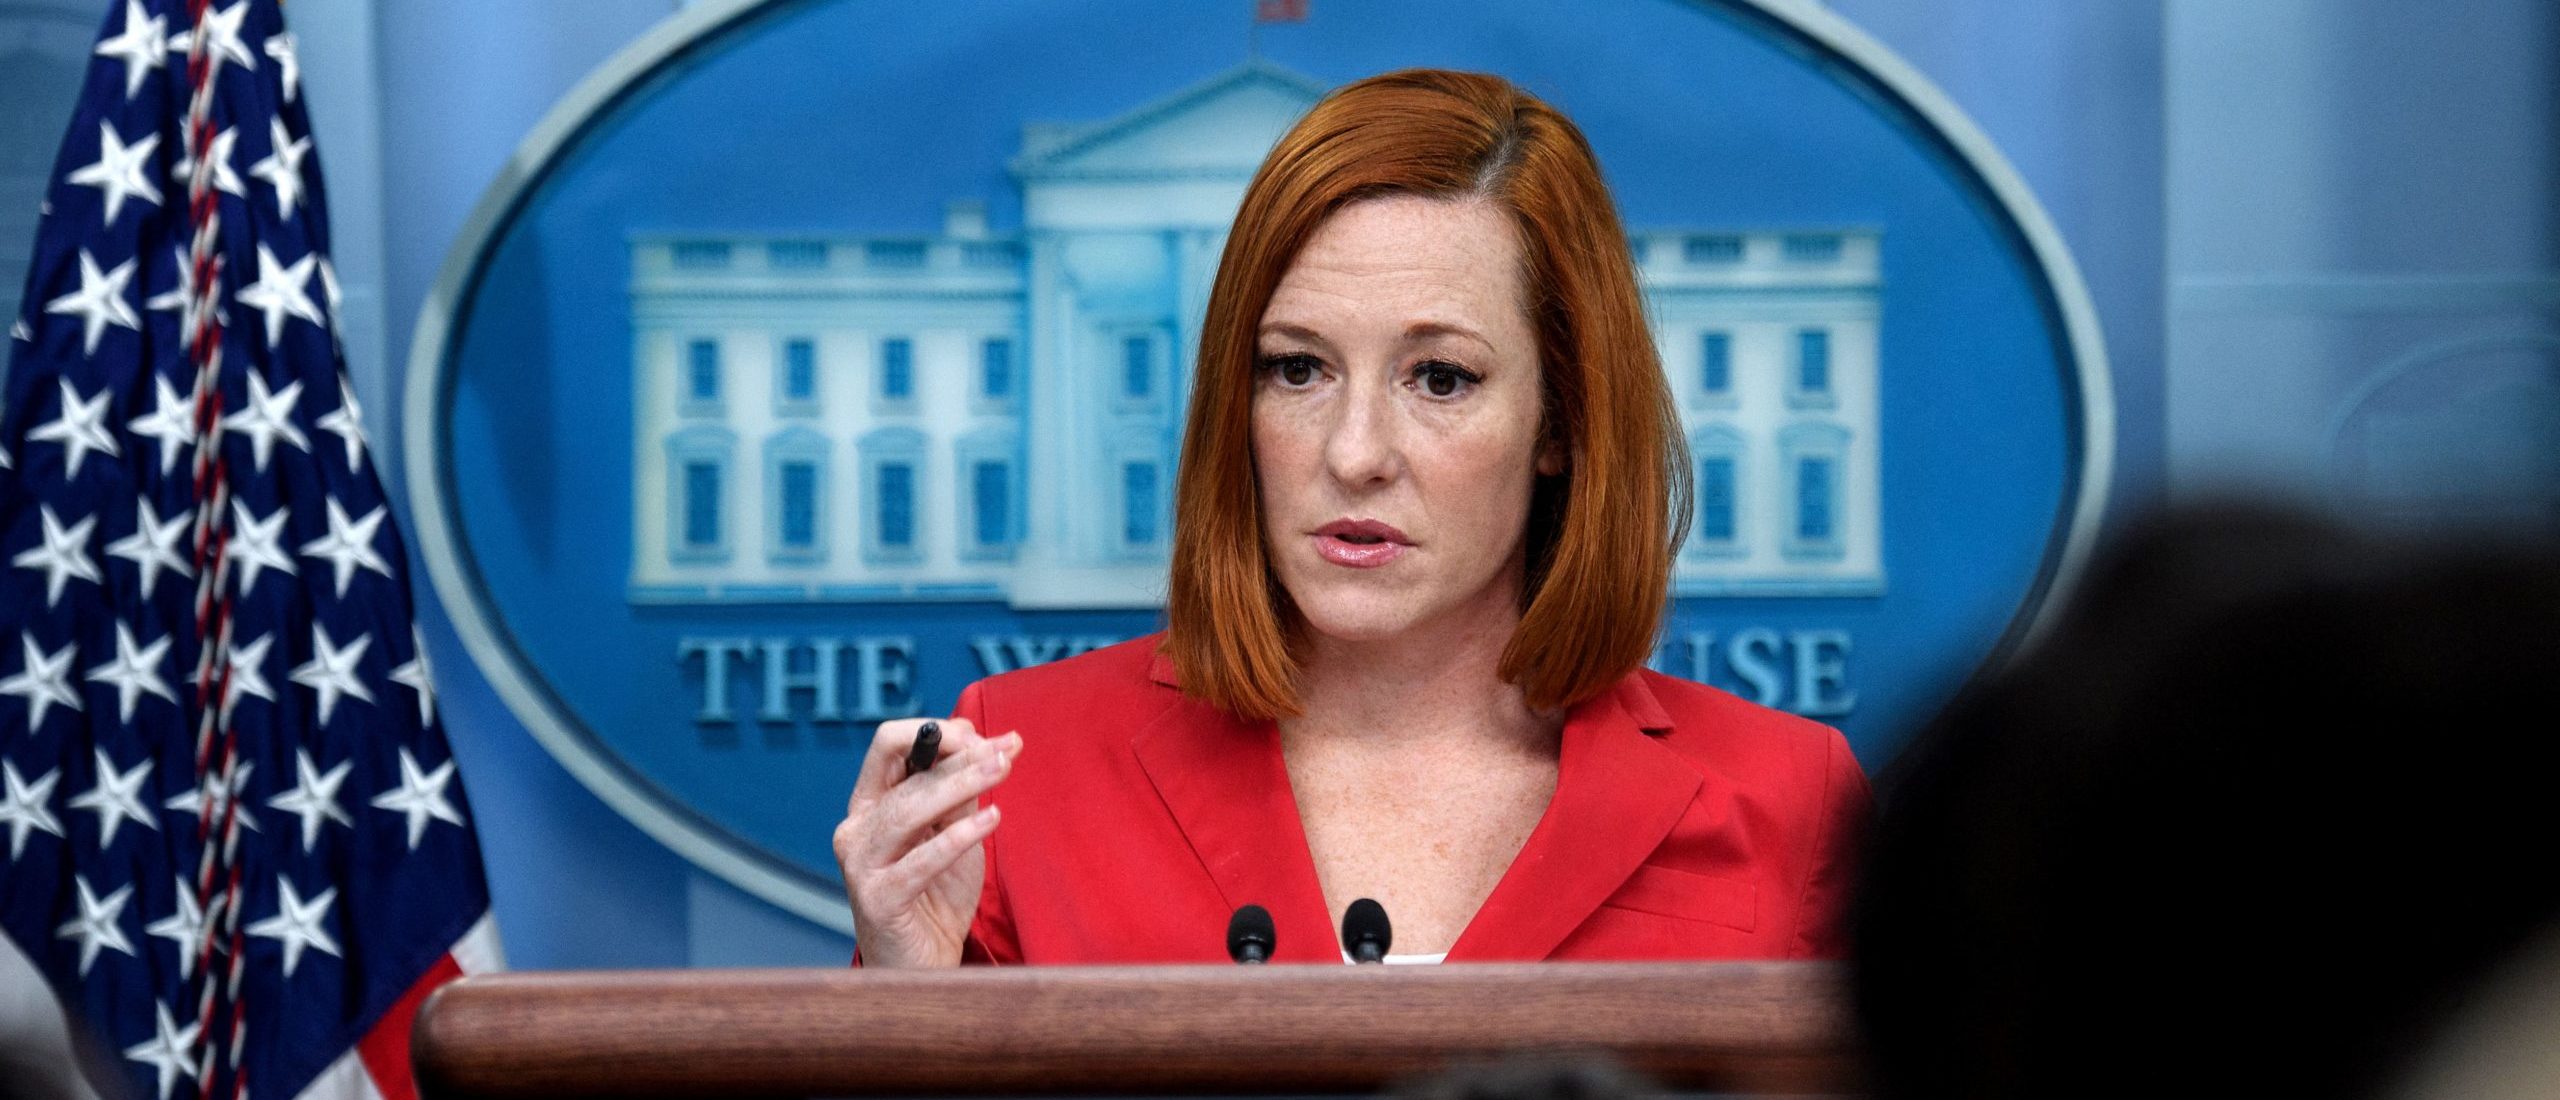 Watchdog Group Calls For Investigation Into Jen Psaki’s ‘Conflict Of Interest’